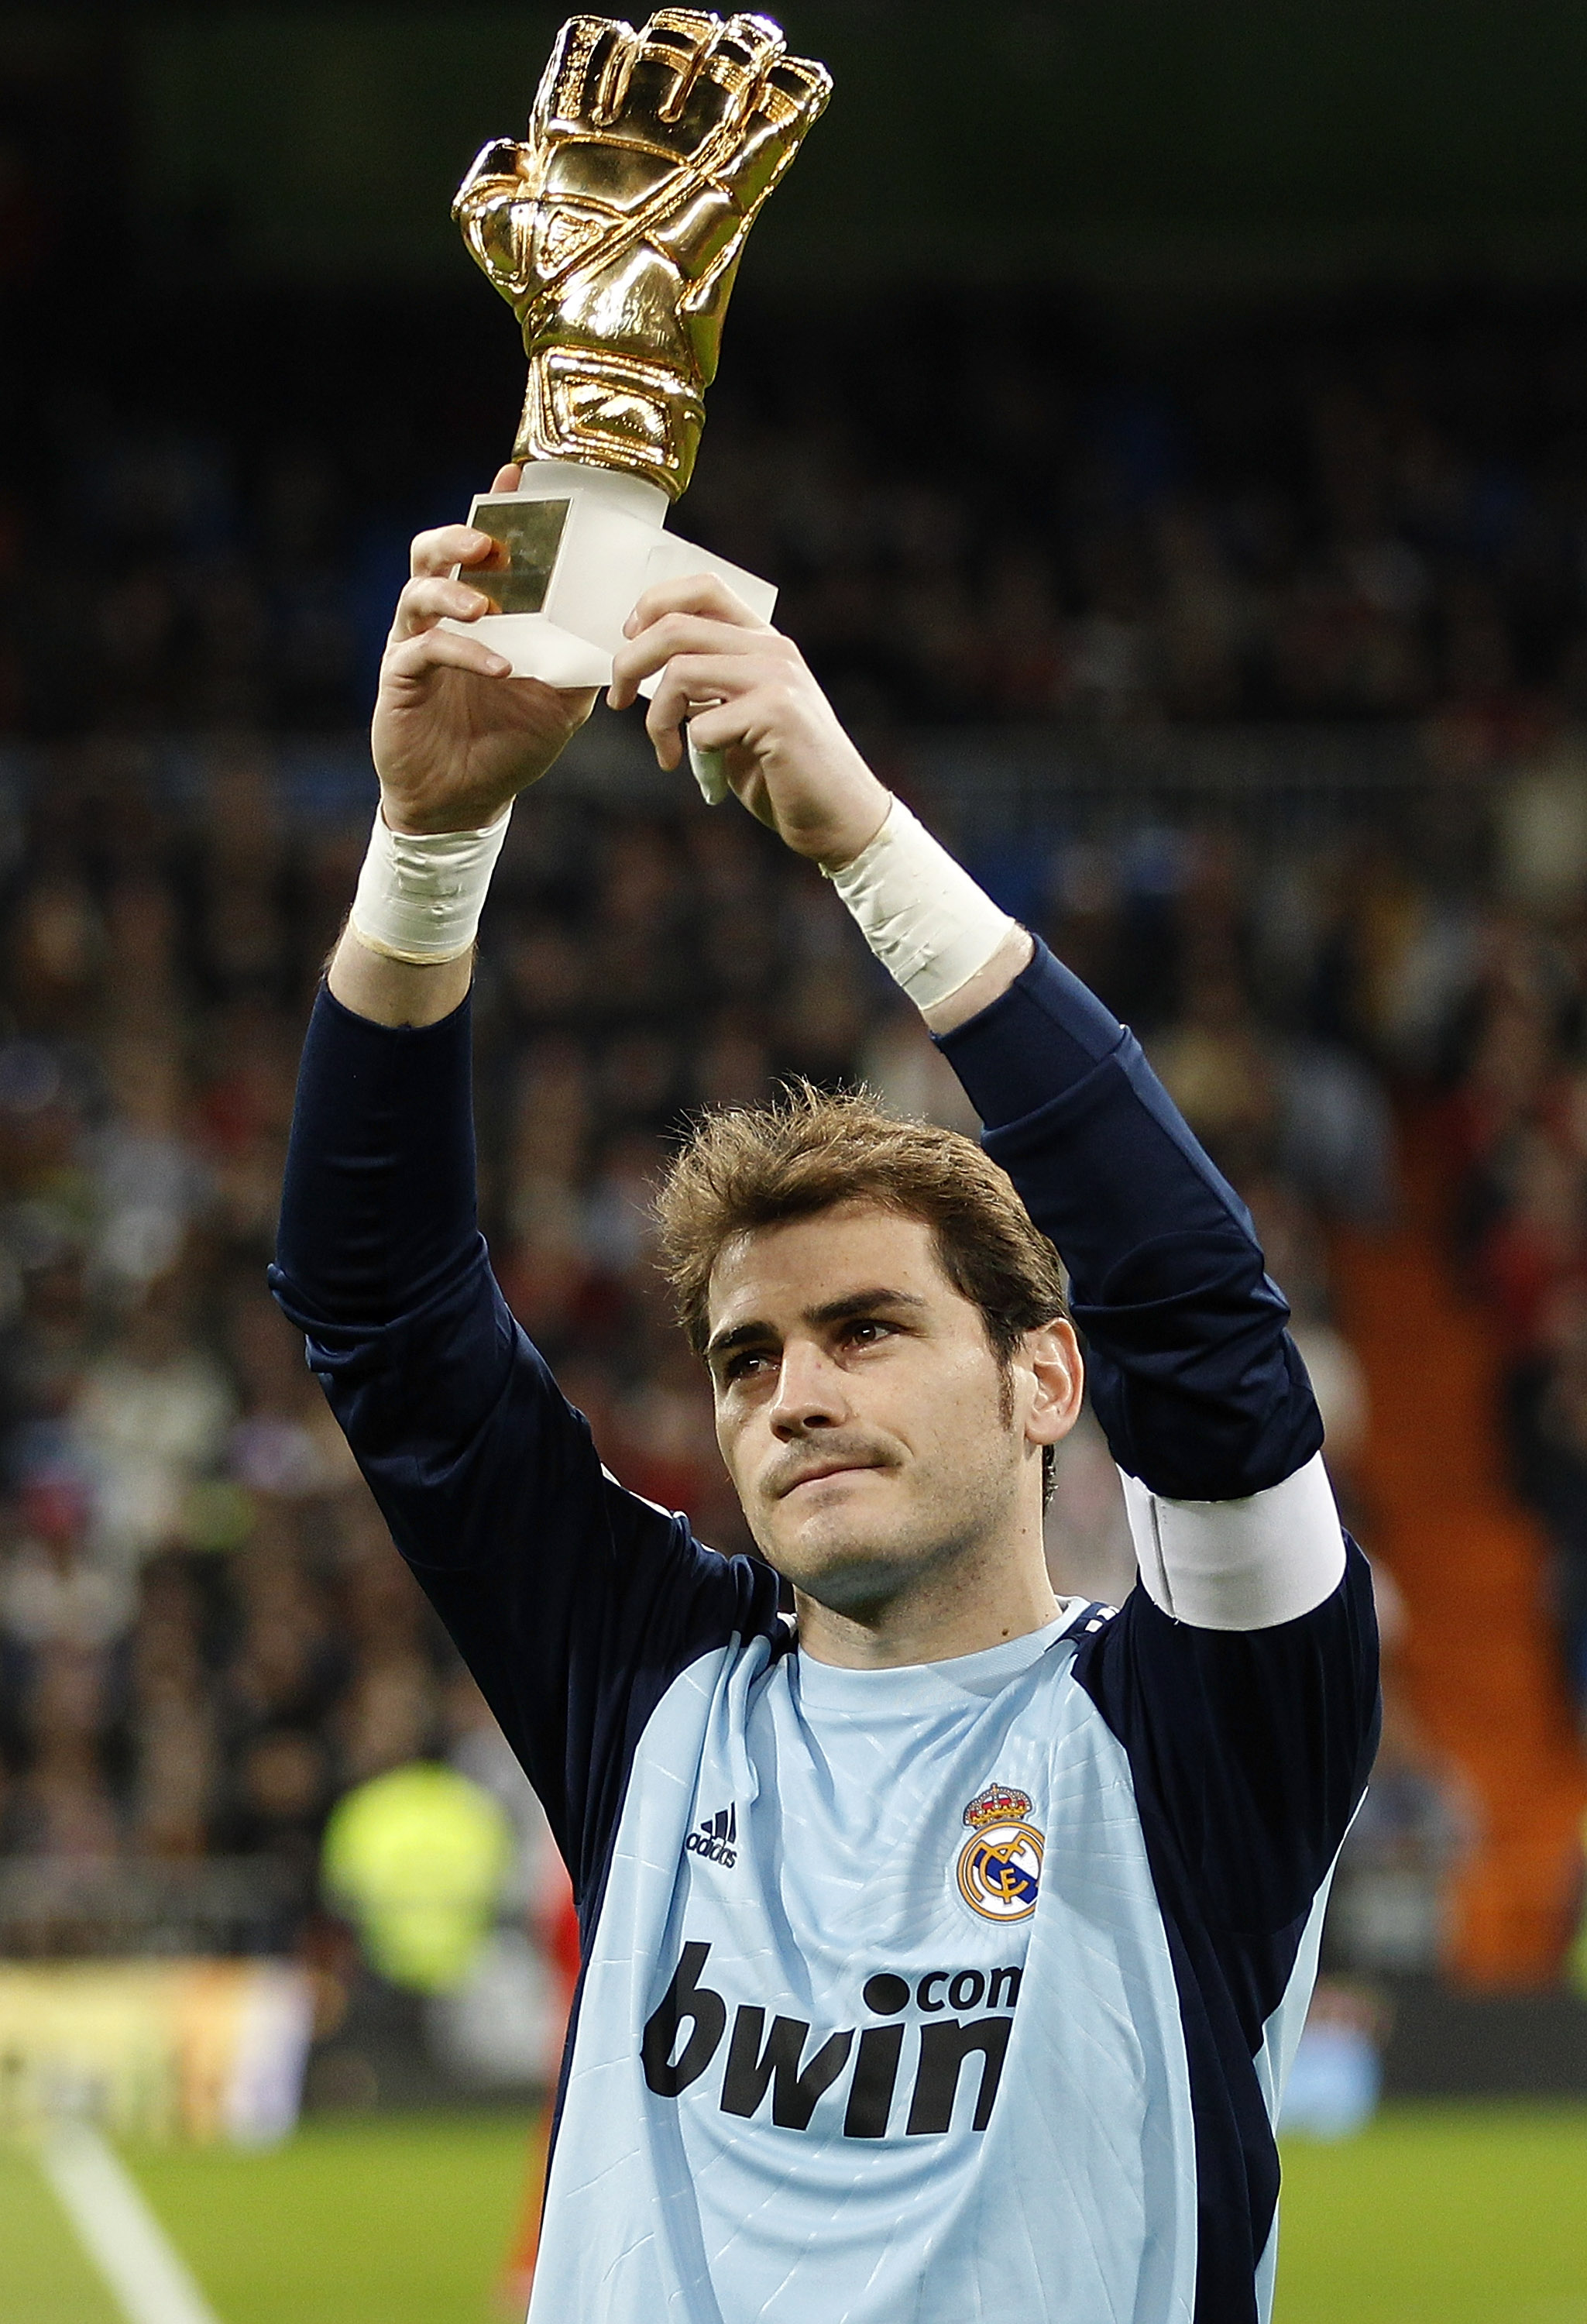 MADRID, SPAIN - DECEMBER 19: Iker Casillas of Real Madrid shows the trophy of Golden Glove Award prior of the La Liga match between Real Madrid and Sevilla at Estadio Santiago Bernabeu on December 19, 2010 in Madrid, Spain. (Photo by Angel Martinez/Getty